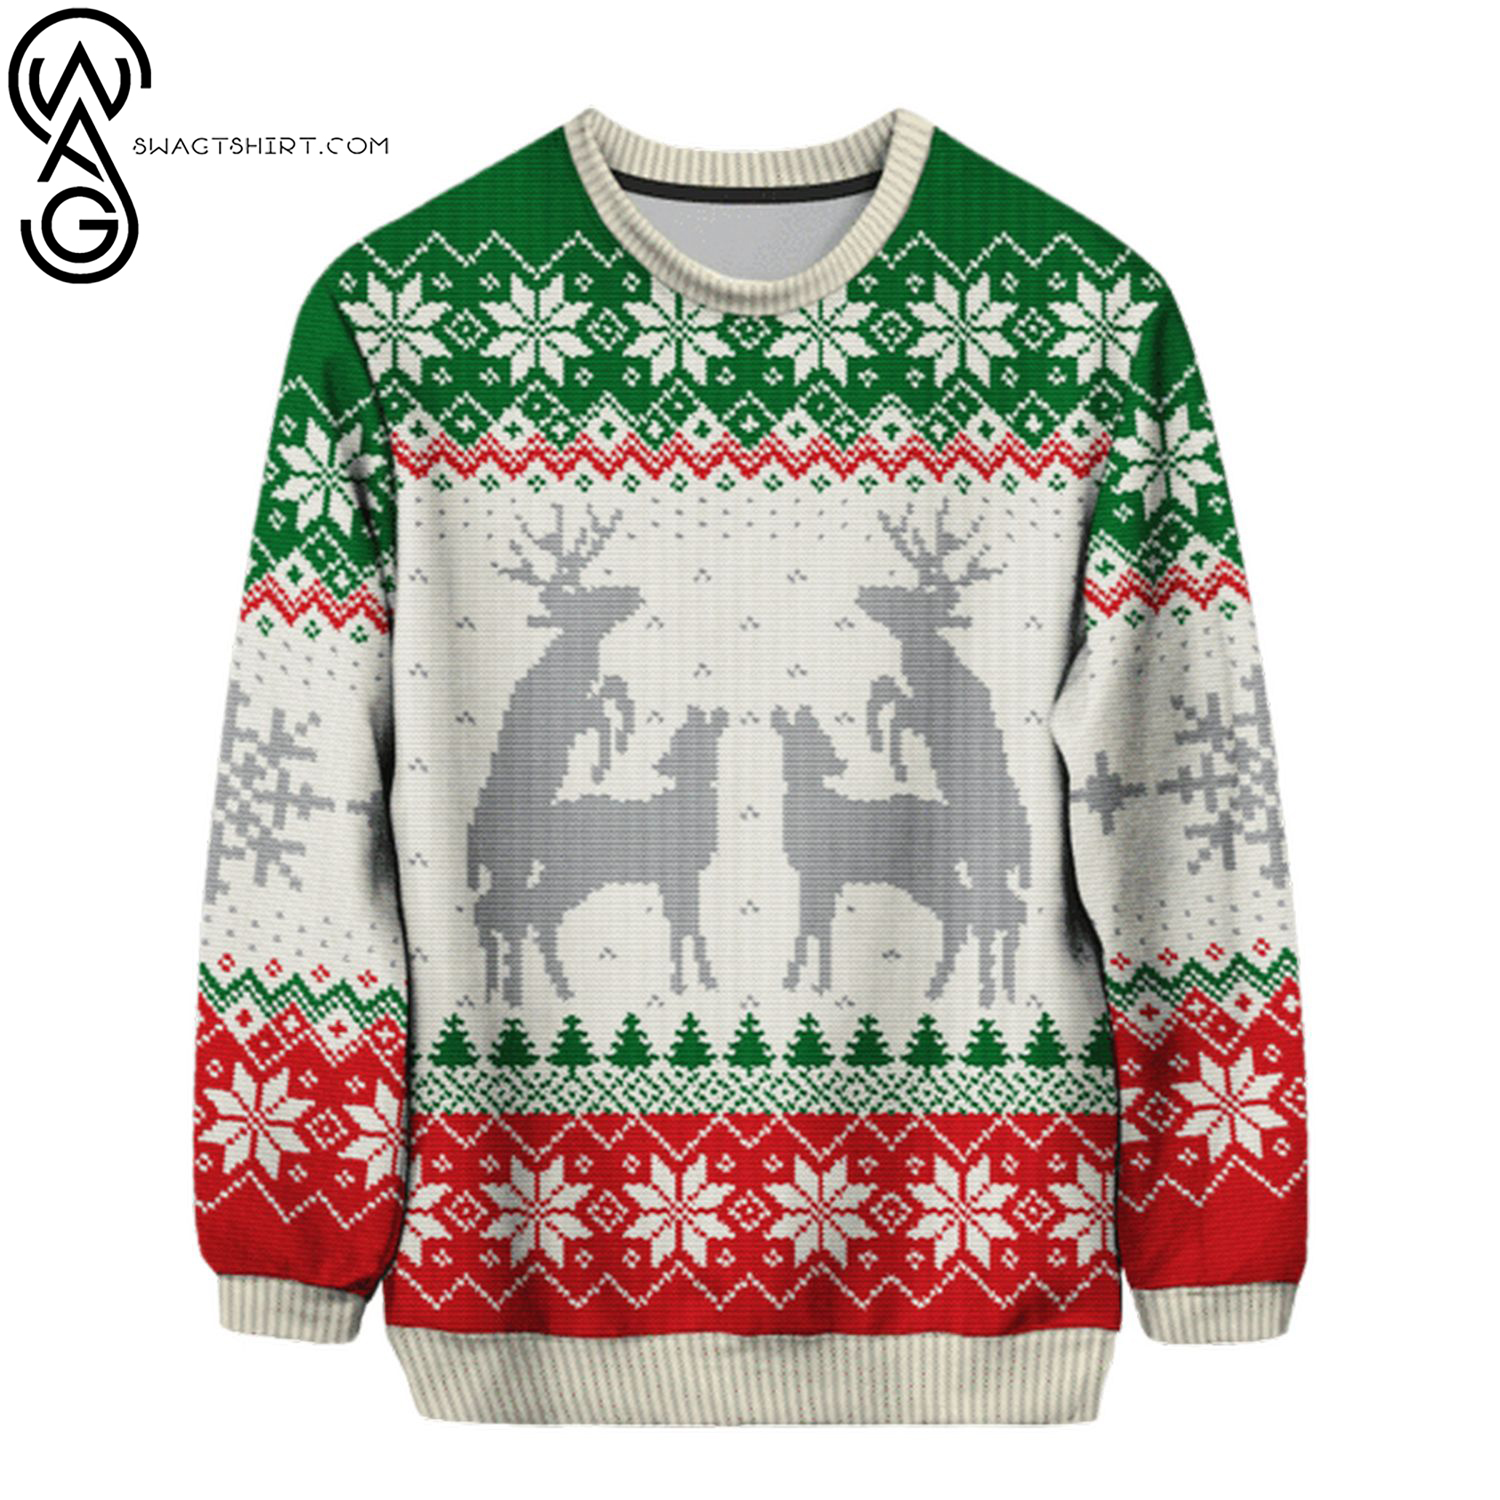 Humping sex reindeer full printing ugly christmas sweater